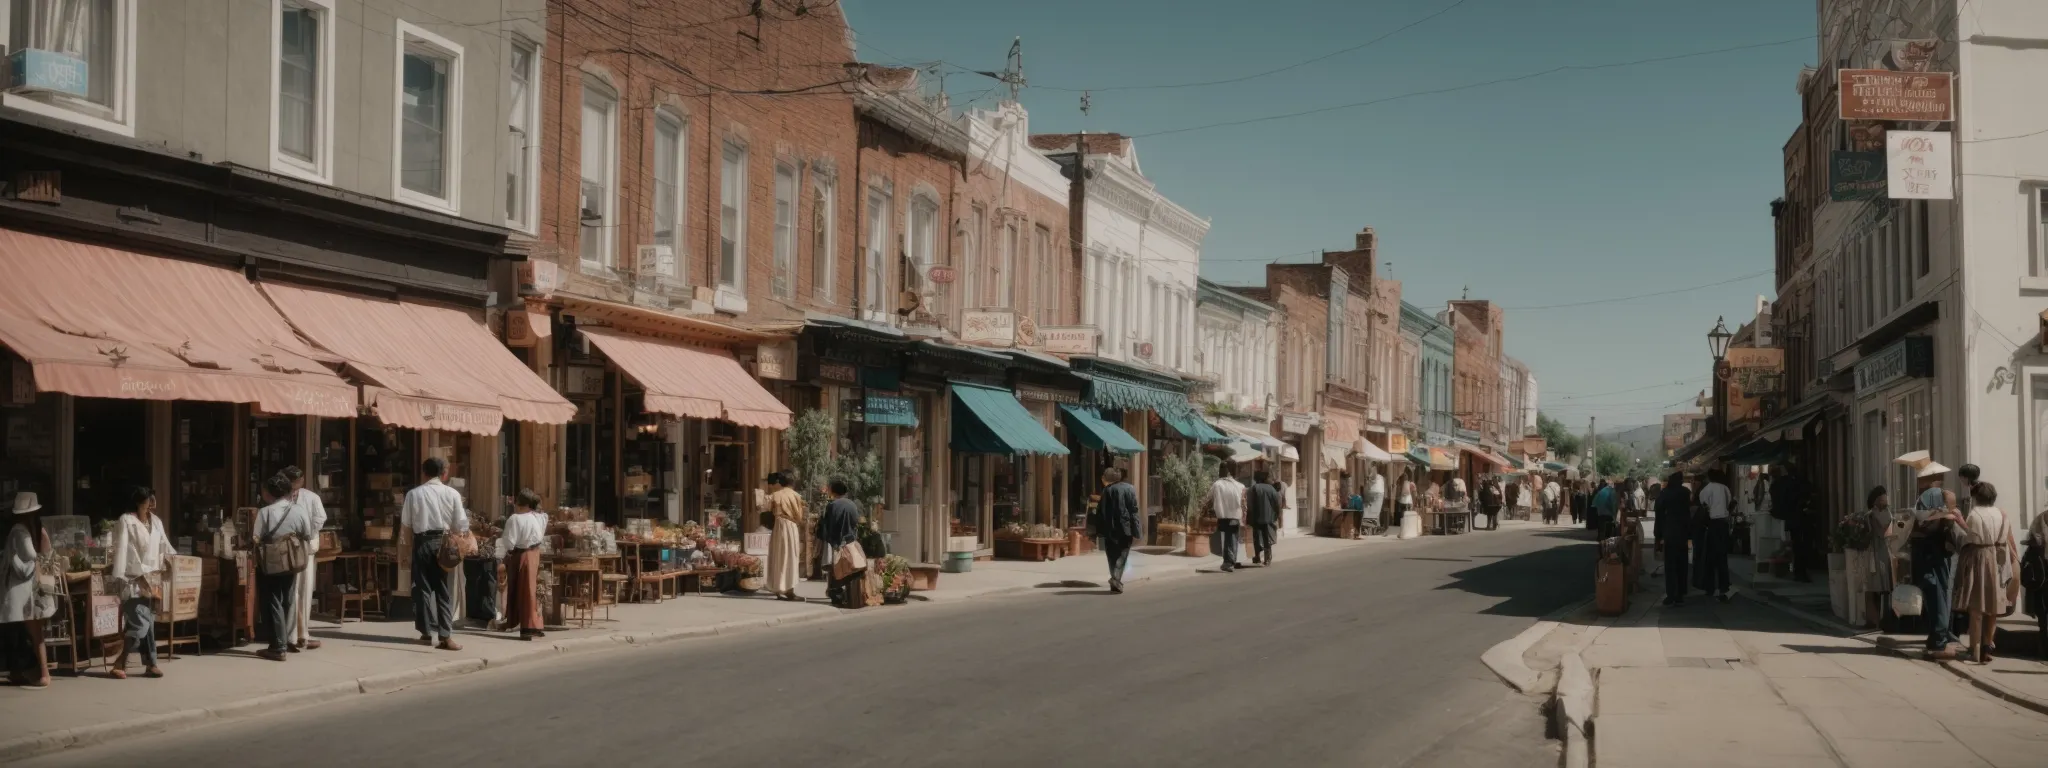 a bustling small town street with diverse storefronts and passersby engaged with their surroundings.